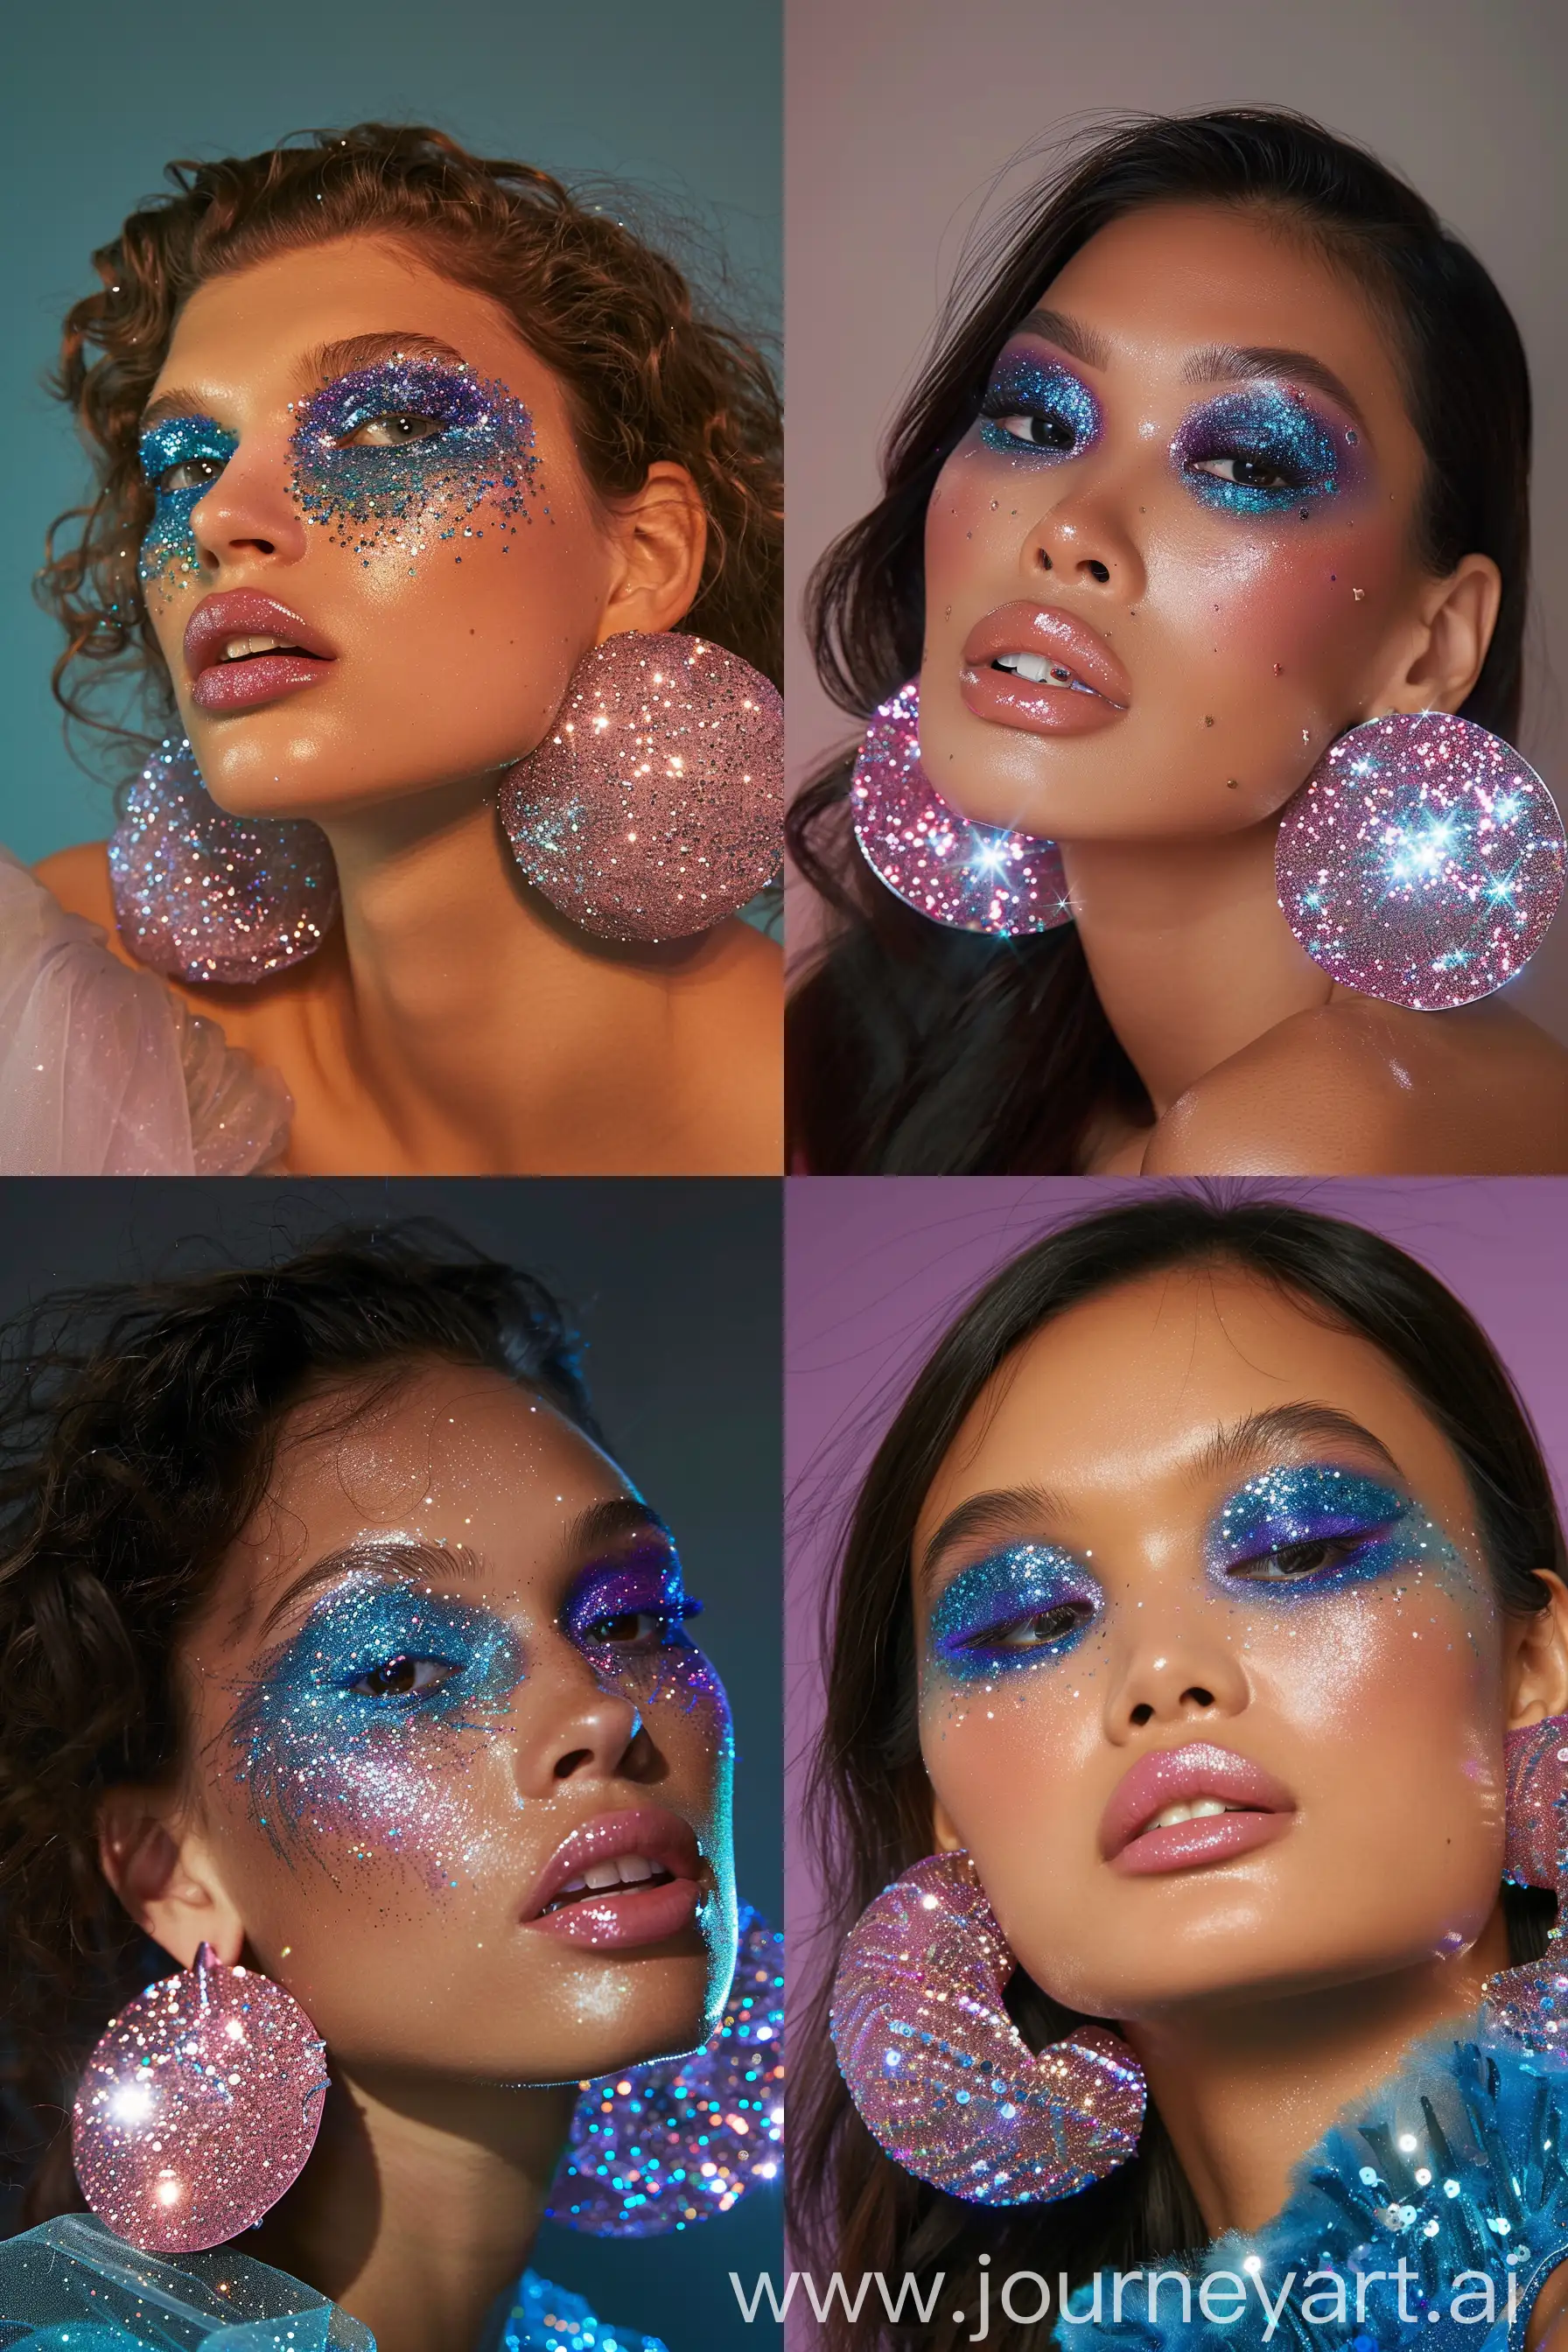 Glamorous-Y2KInspired-Model-with-Sparkling-Eyeshadow-and-Glitter-Earrings